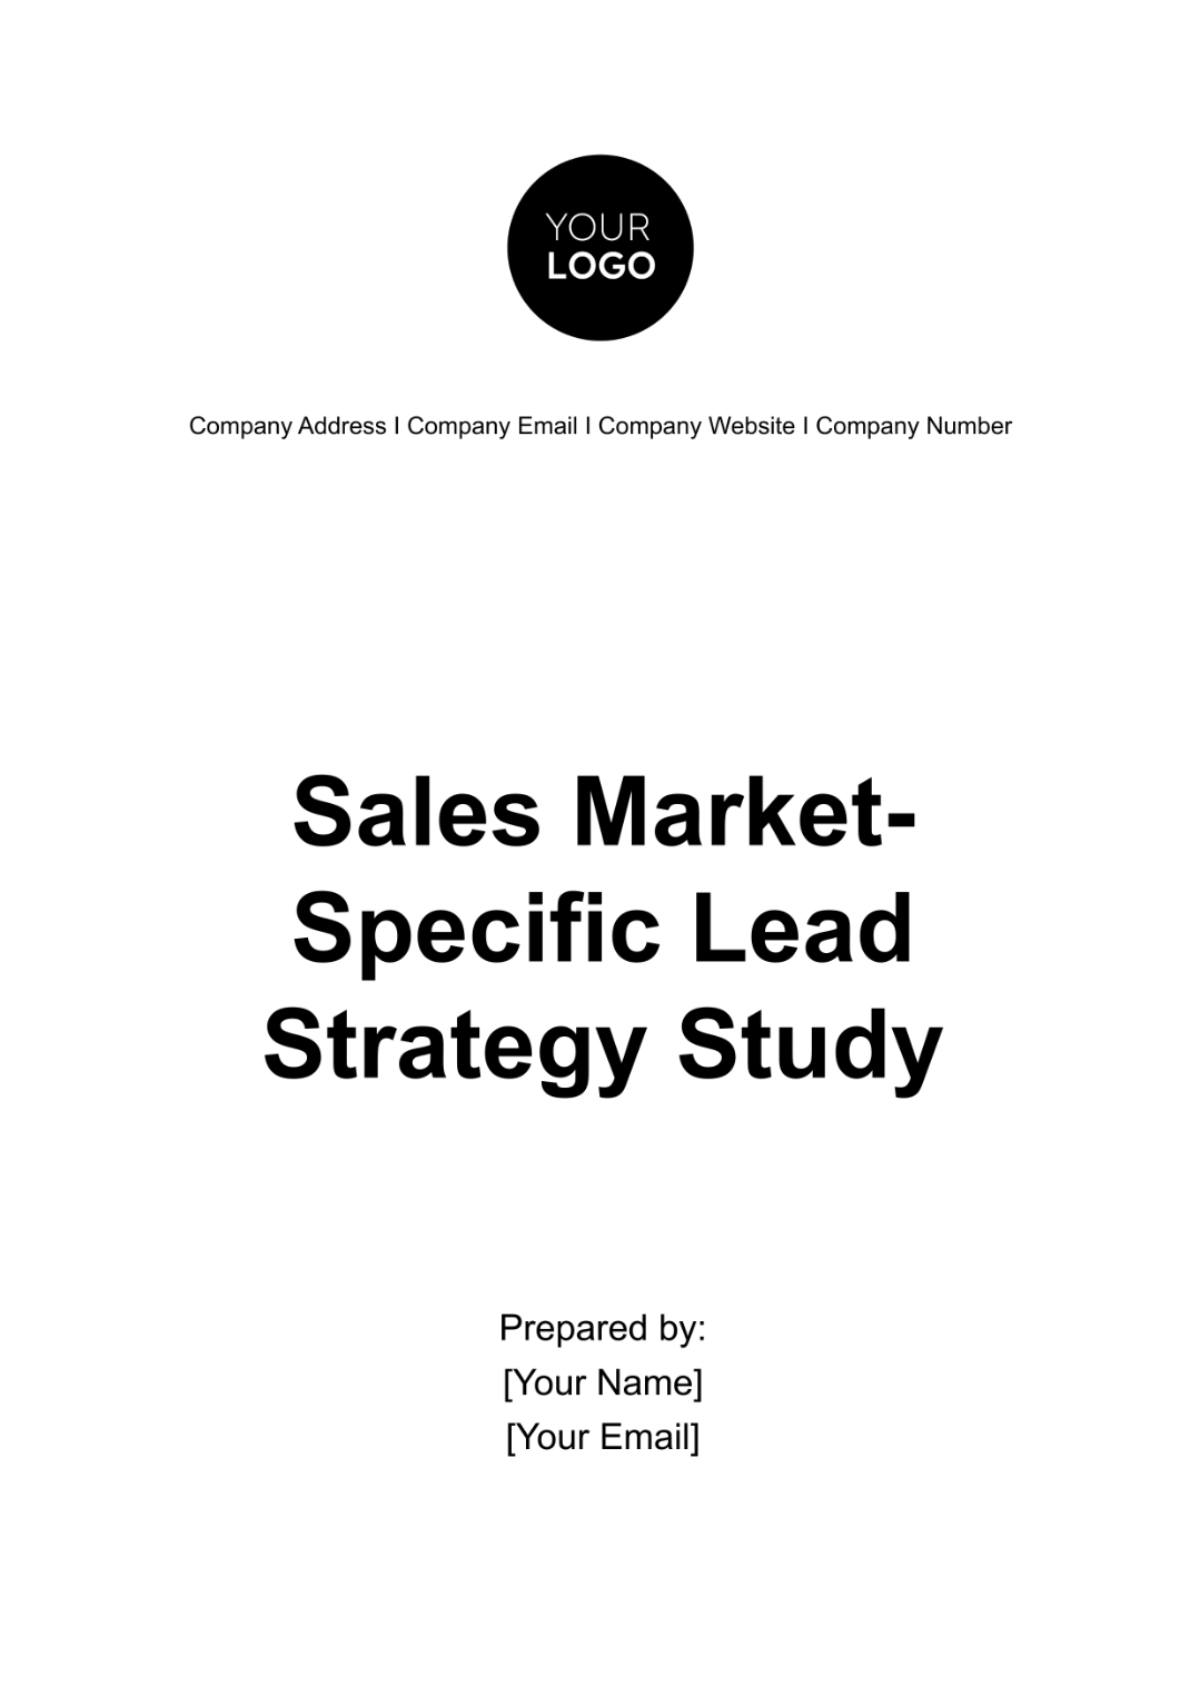 Free Sales Market-Specific Lead Strategy Study Template